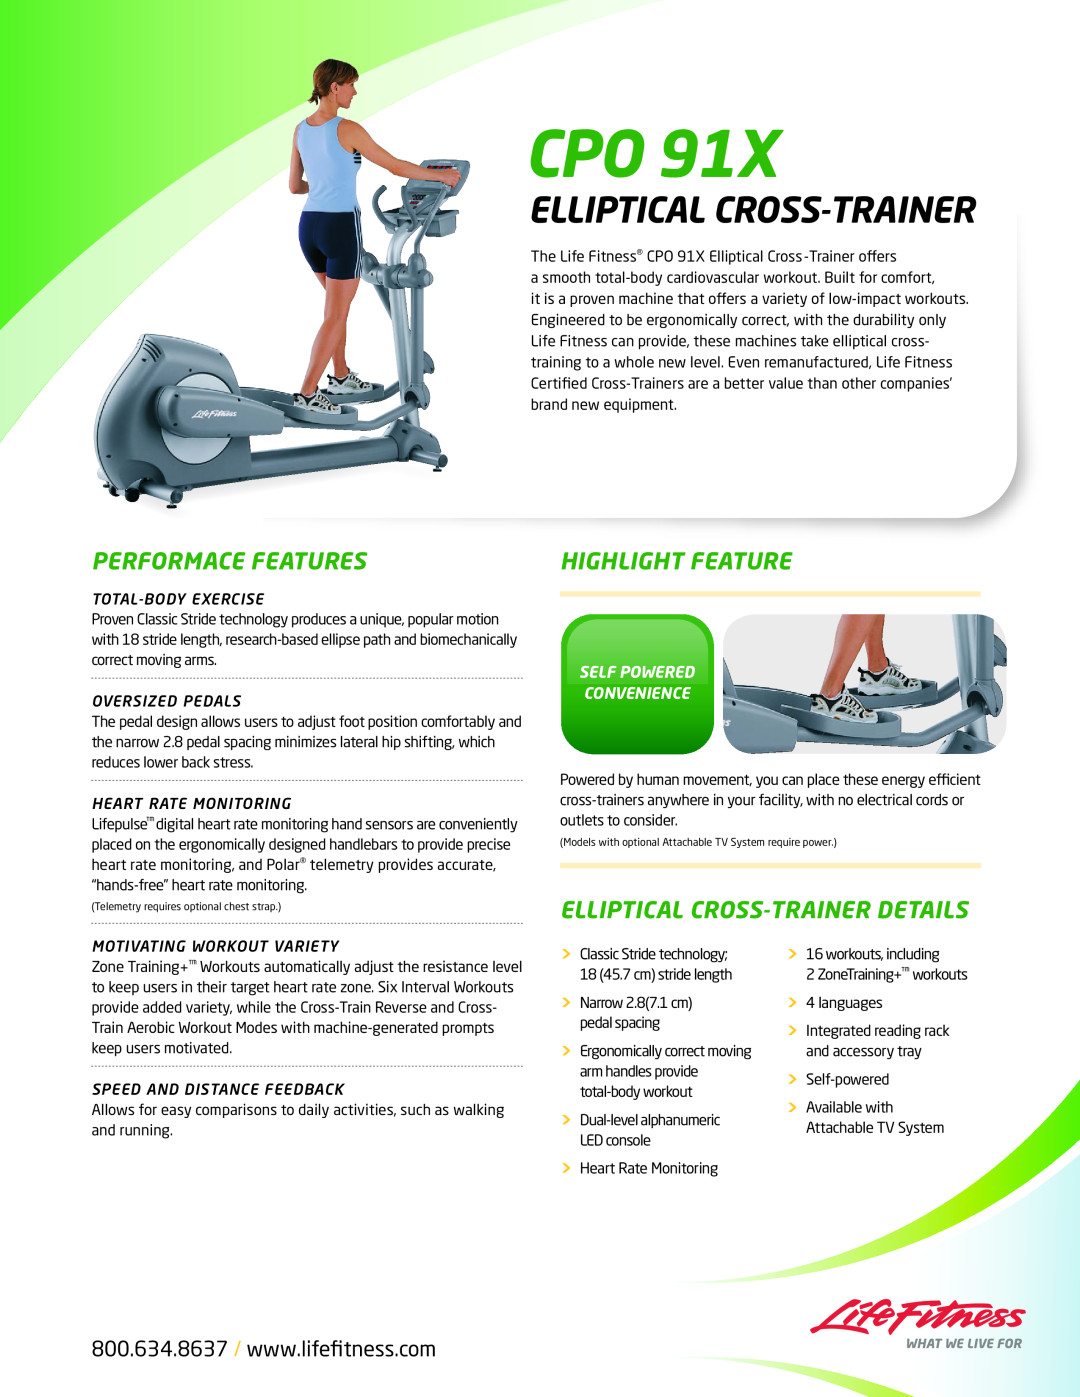 Life Fitness CPO 91X manual Performace Features, Highlight Feature, Elliptical Cross-Trainer Details, Total-Body Exercise 